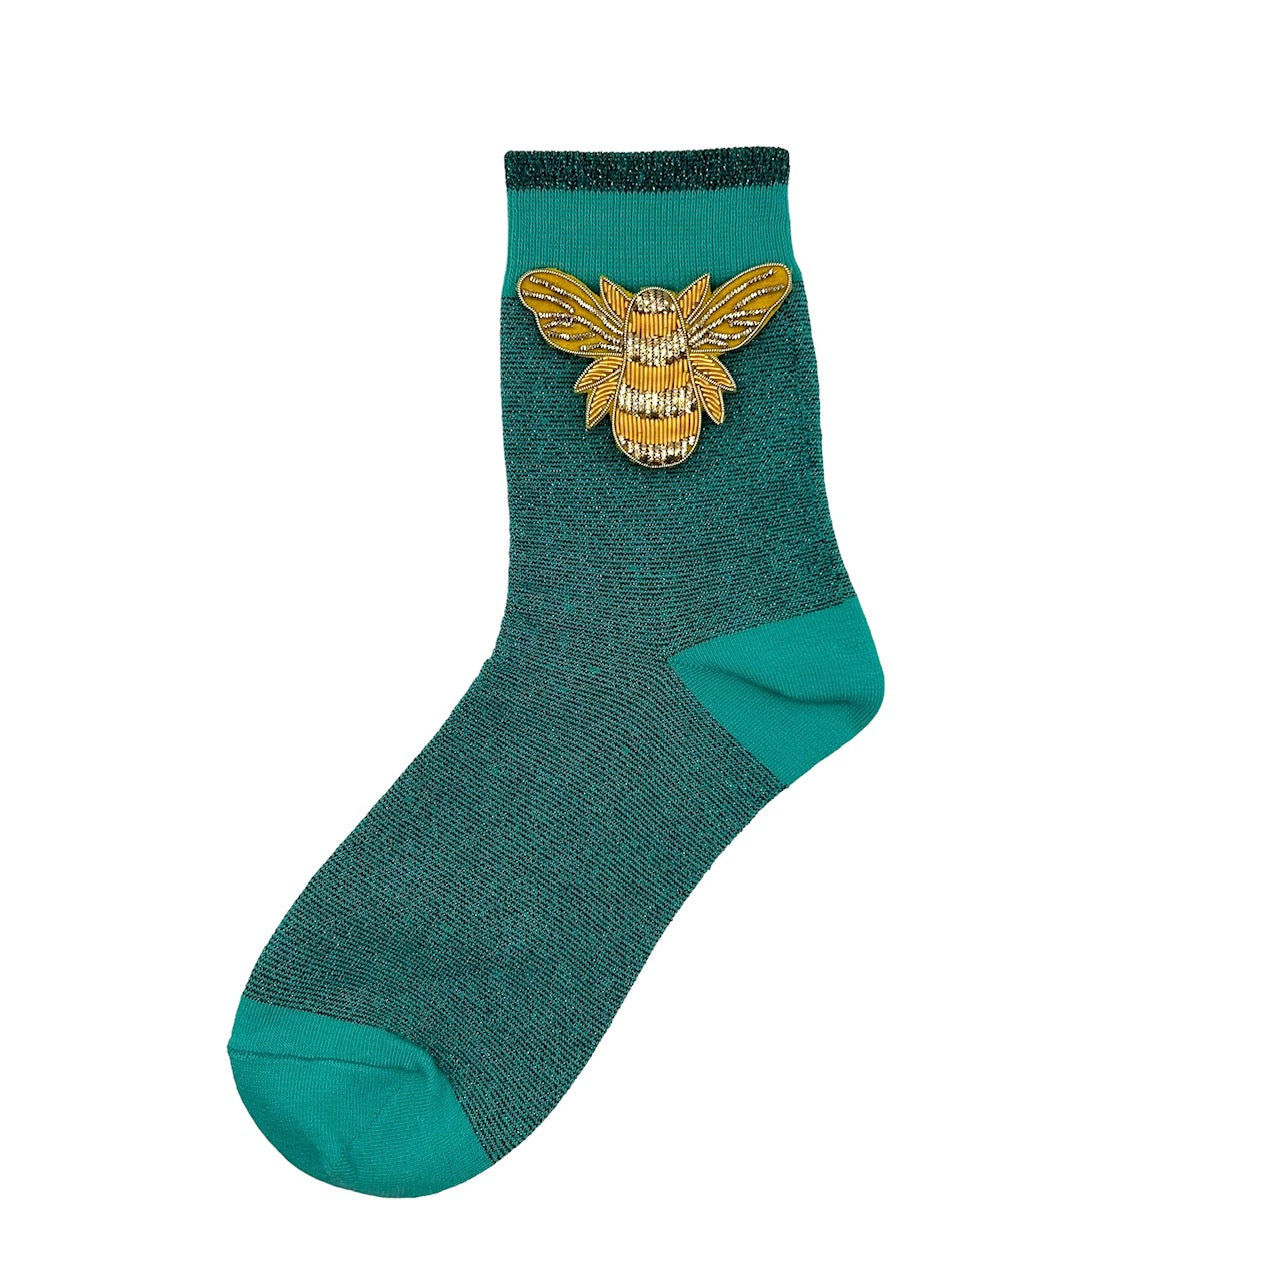 Tokyo socks in turquoise with a gold bee brooch